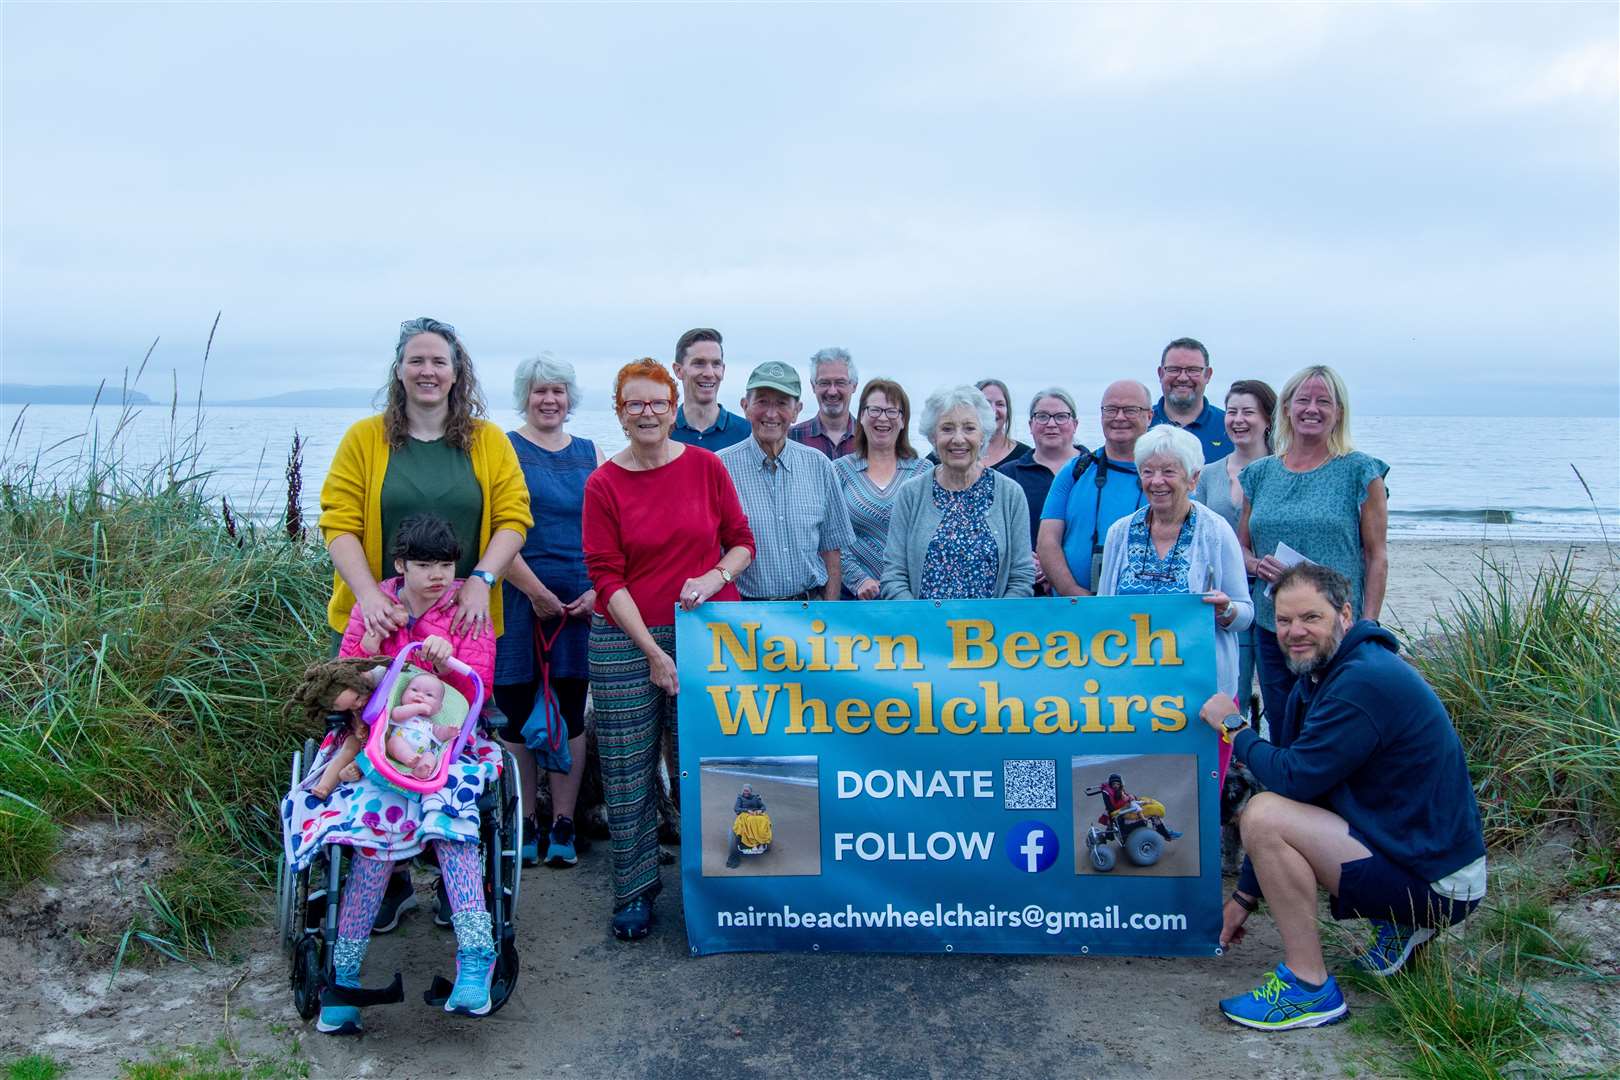 Wild swimmers and Beach Wheelchairs action group members at Nairn beach. Pic: Mary Hemsworth